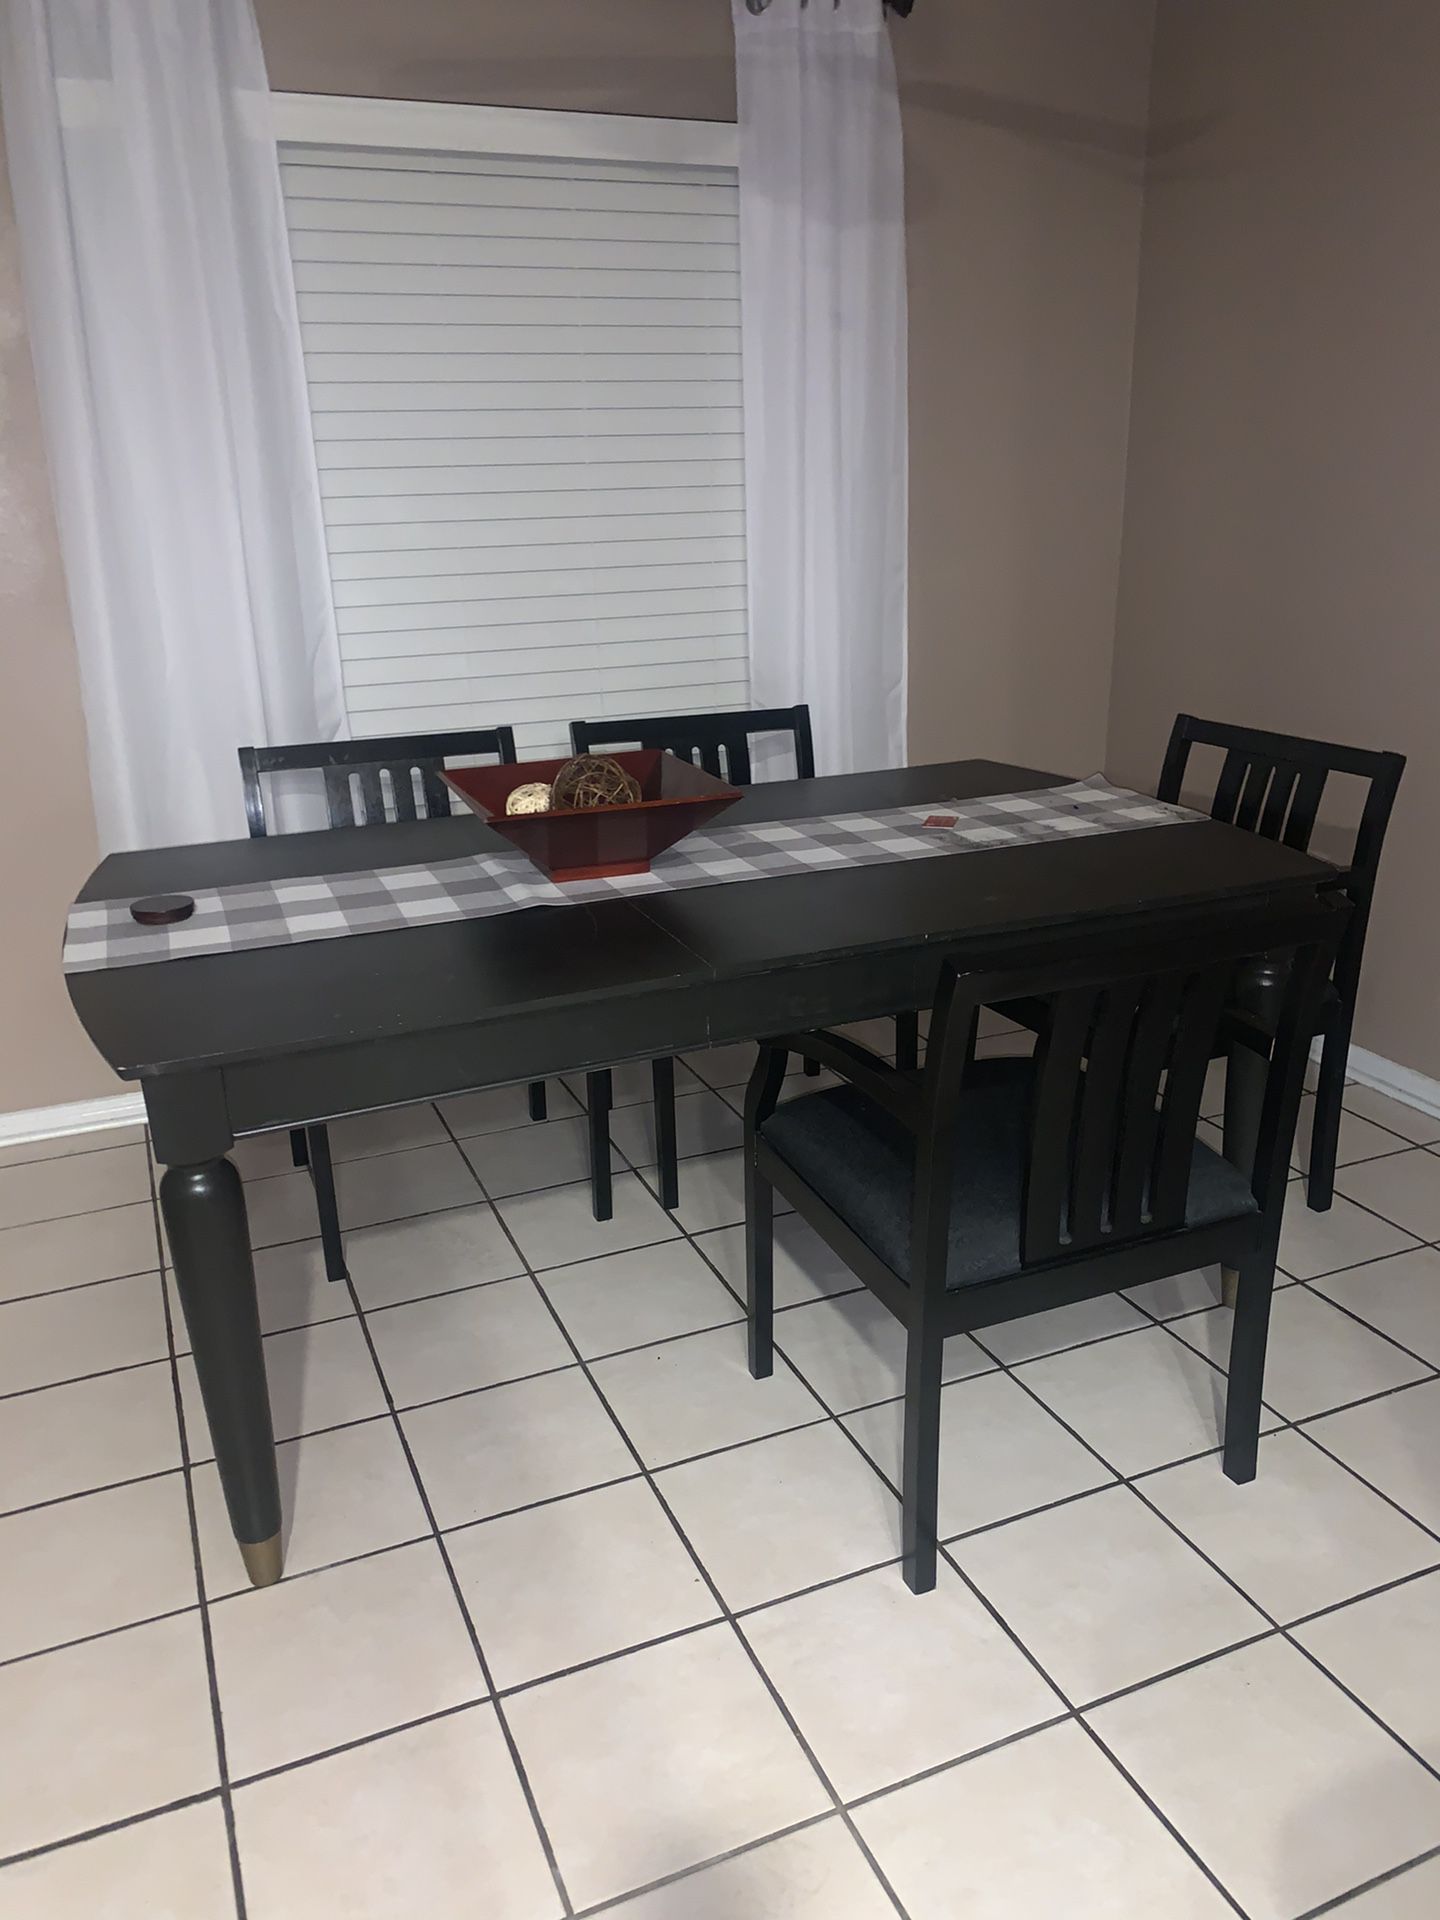 Painted Black Kitchen Table w/ 5 chairs